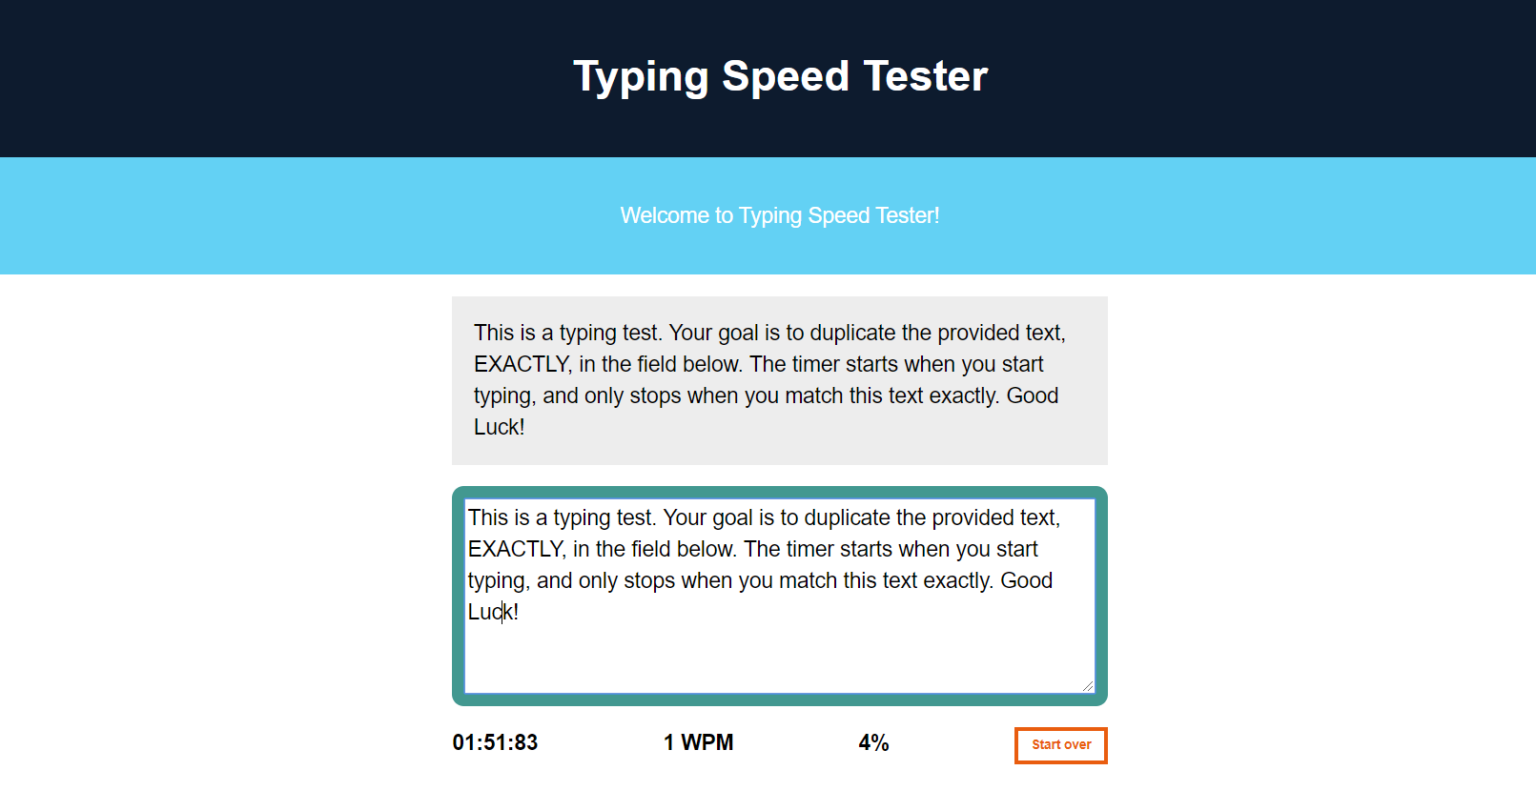 Creating a Click Speed Test Game in HTML5 with JavaScript 